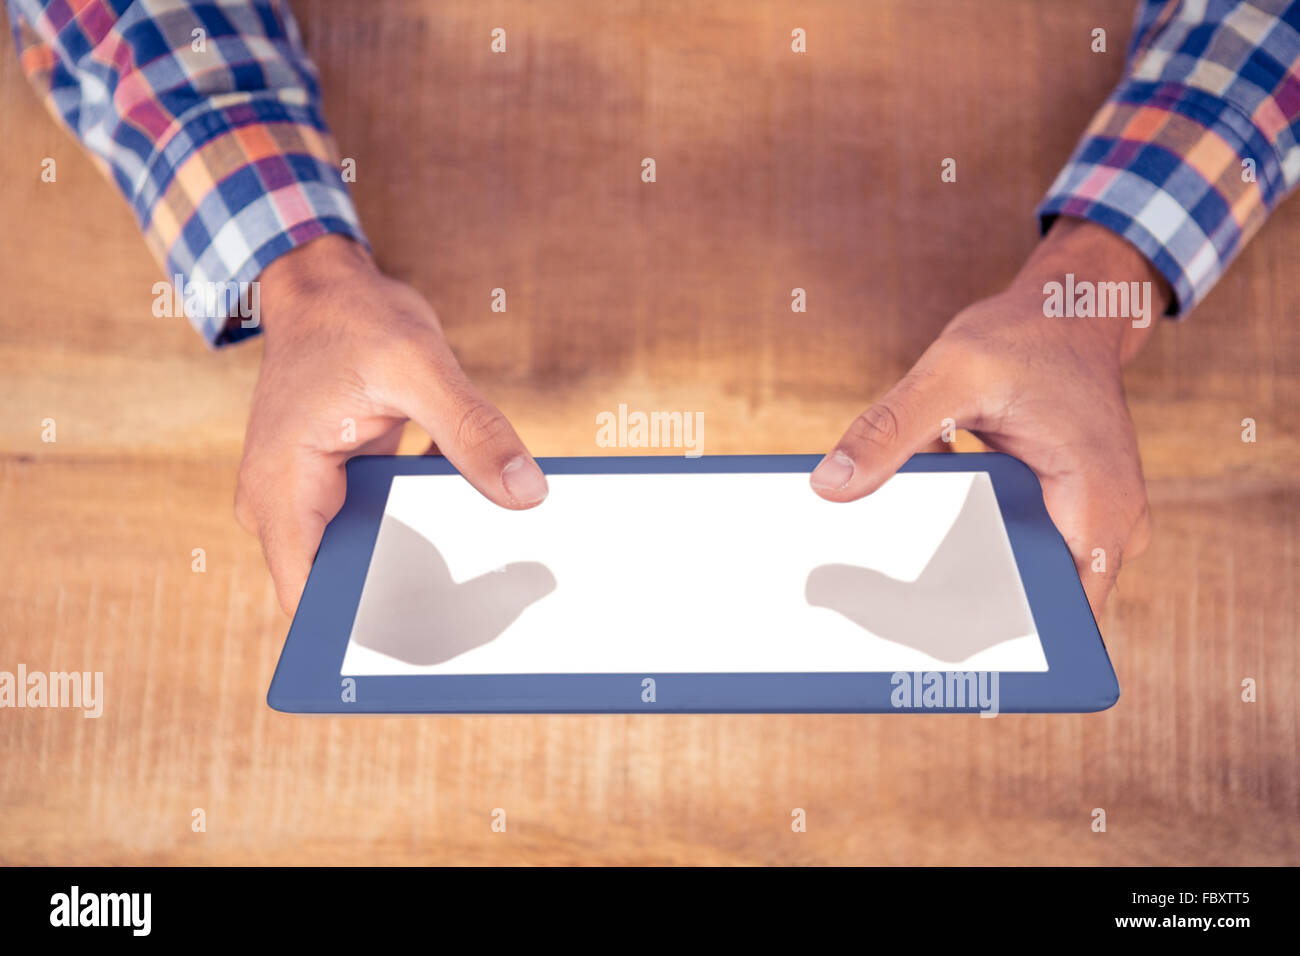 Cropped image of hands using tablet PC Stock Photo